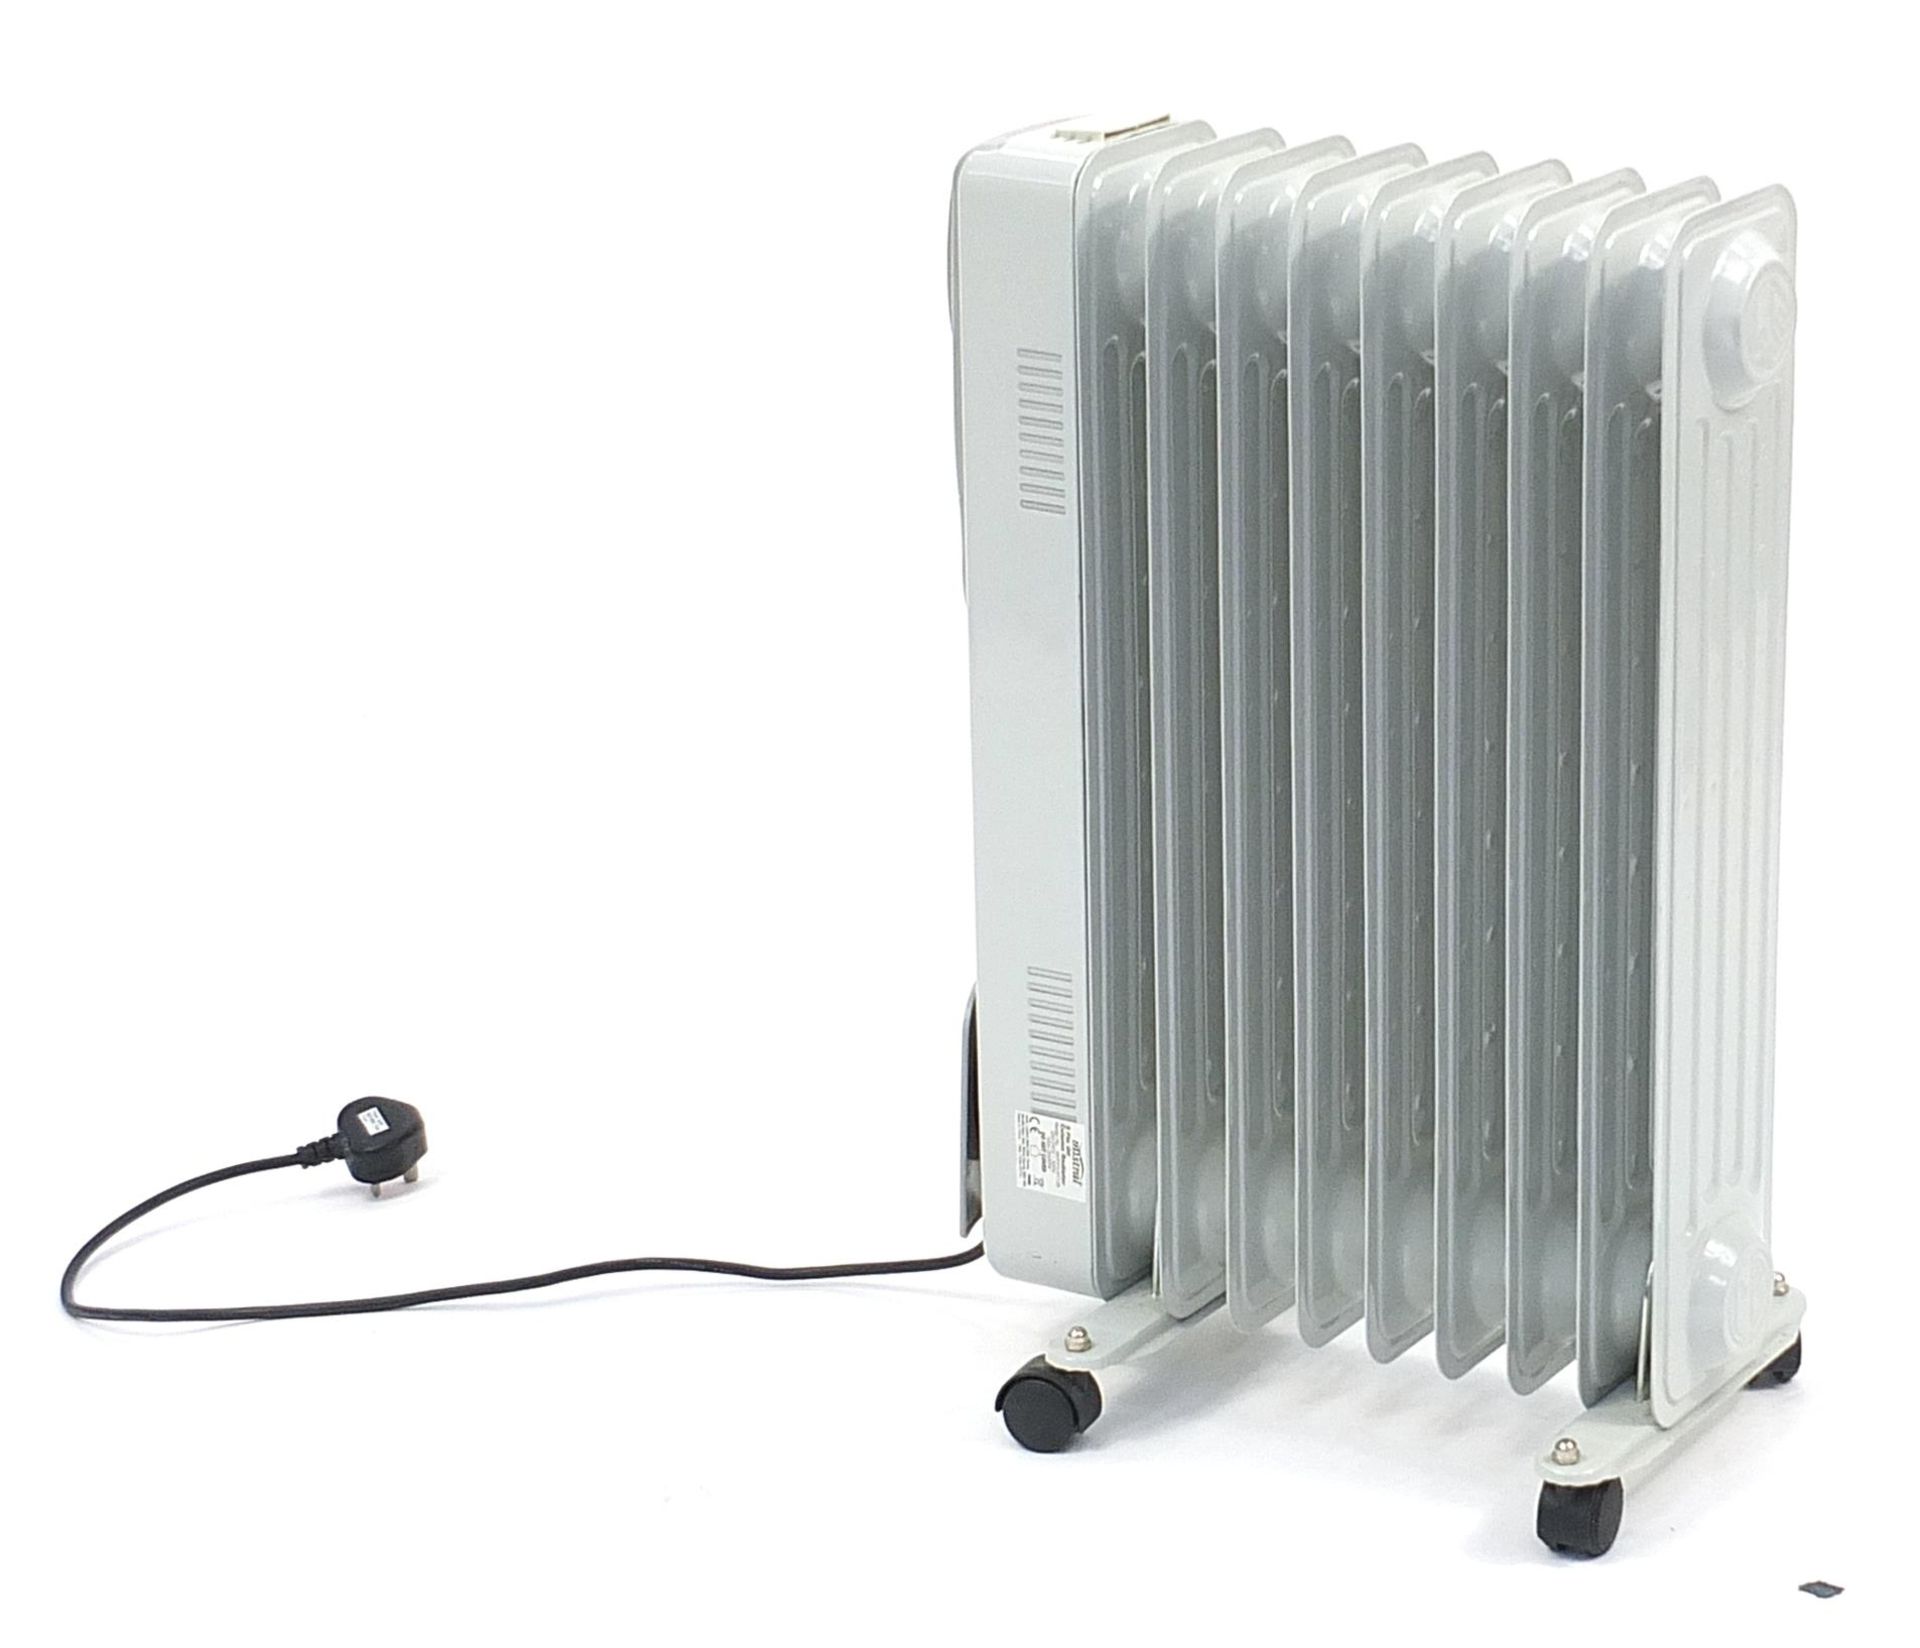 Mistral electric heater, 60cm x 40cm - Image 2 of 3